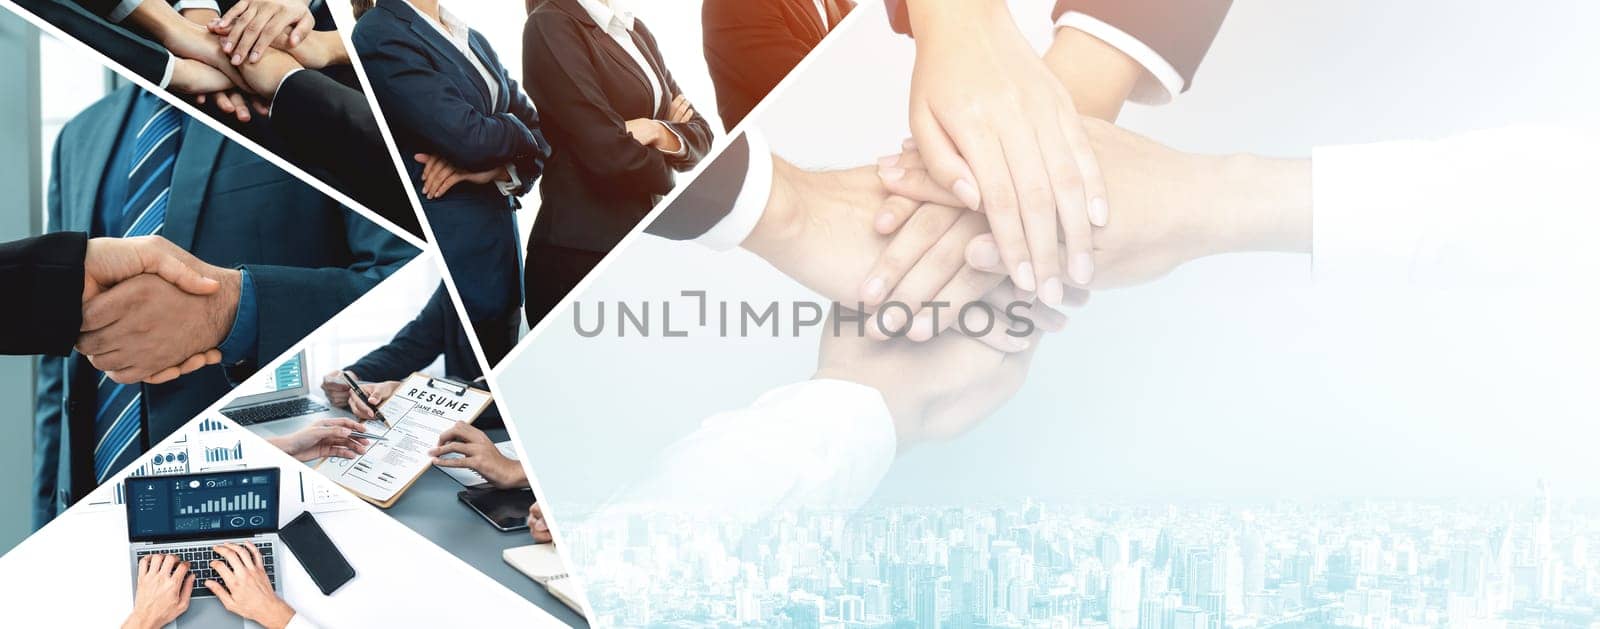 Teamwork and human resources HR management technology concept in corporate business with people group networking to support partnership, trust, teamwork and unity of coworkers in office vexel